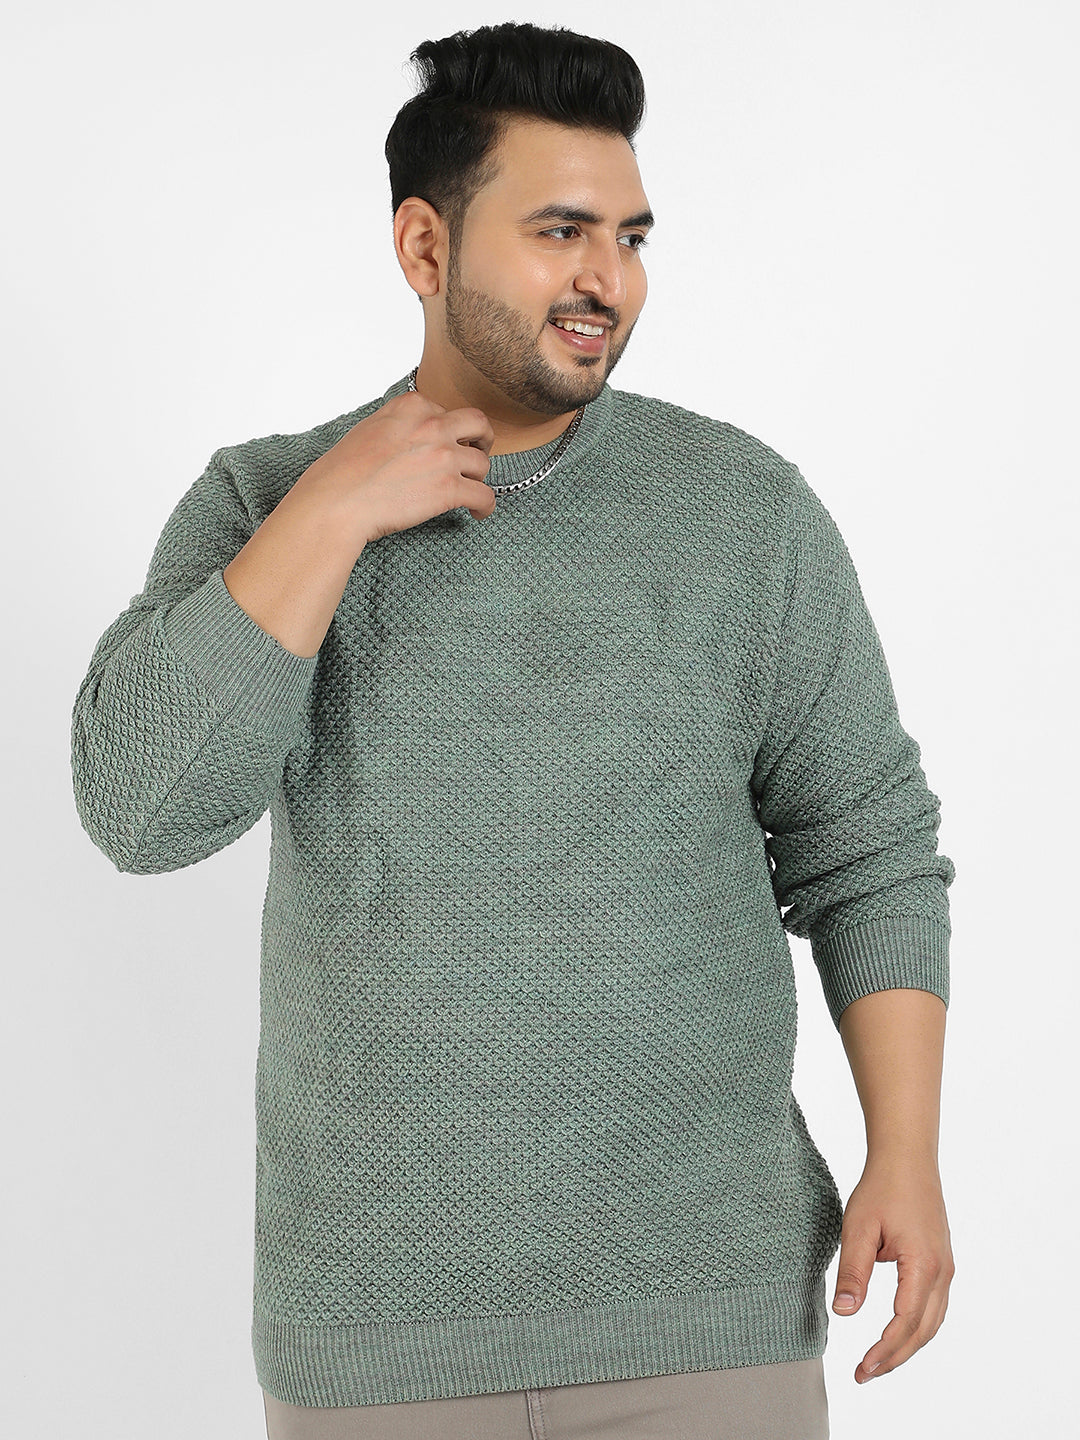 Olive Green Textured Knit Pullover Sweater